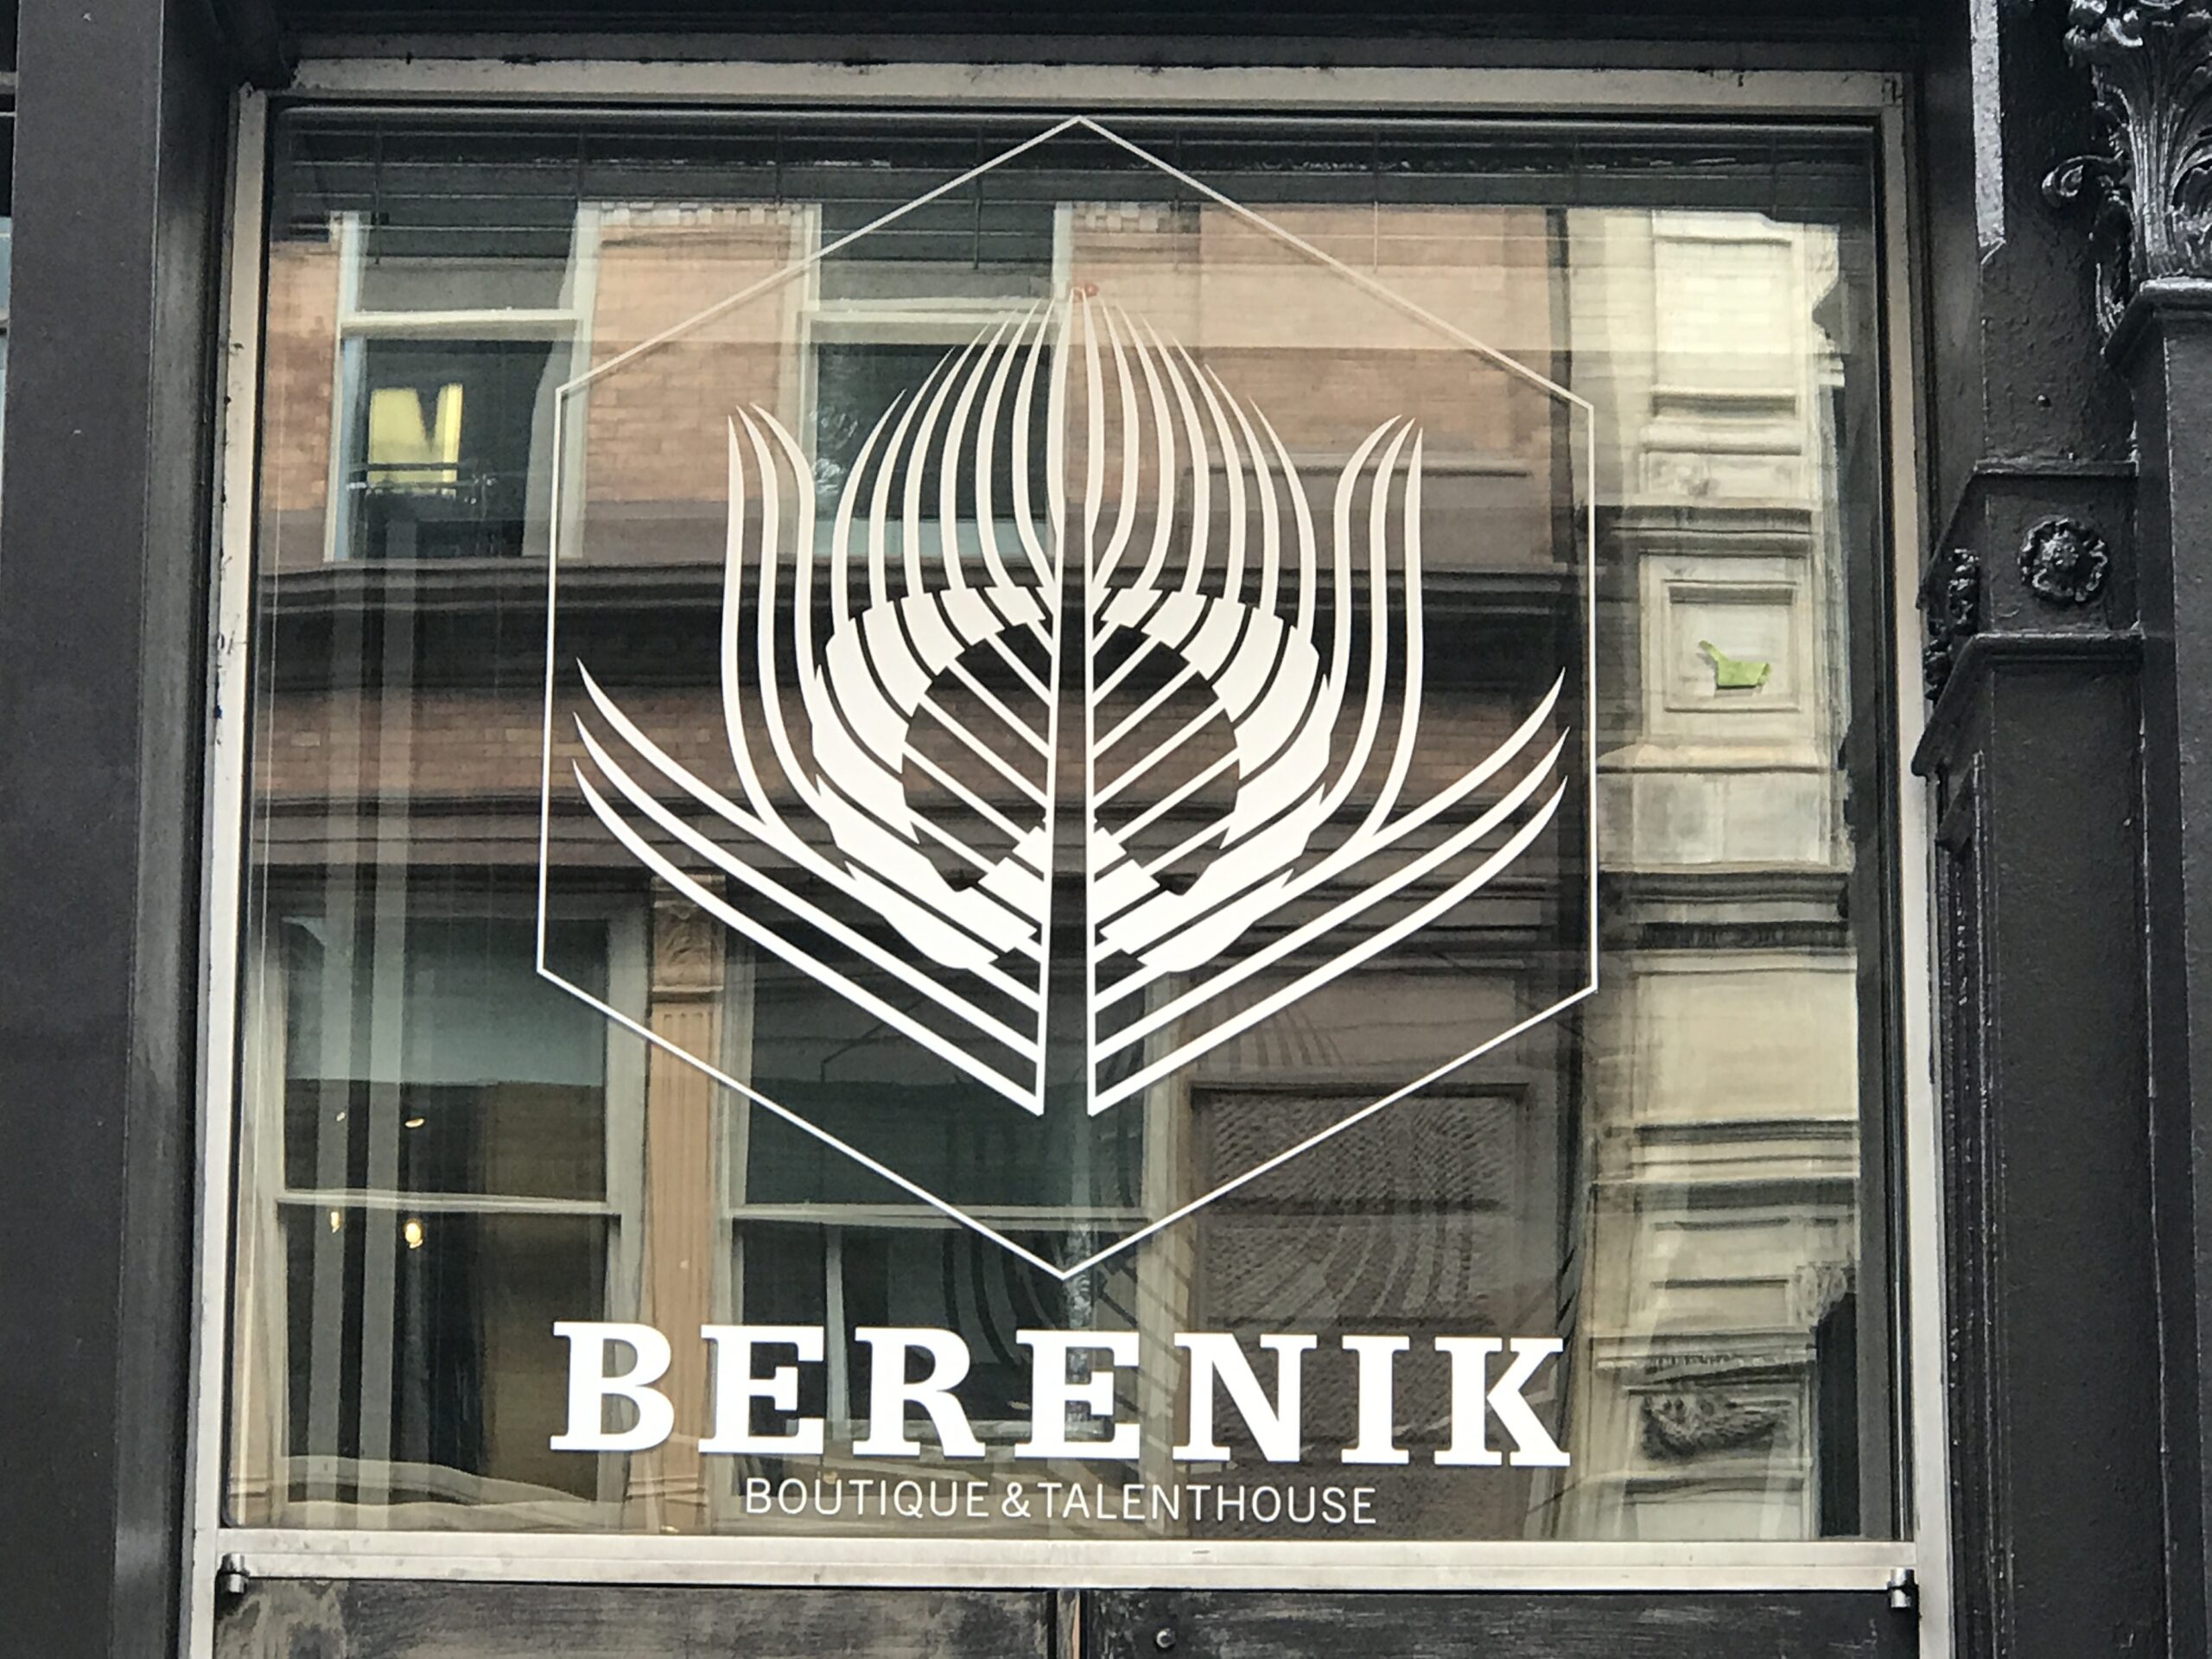 A cut to shape vinyl window decal logo for Berenik - a talenthouse storefront